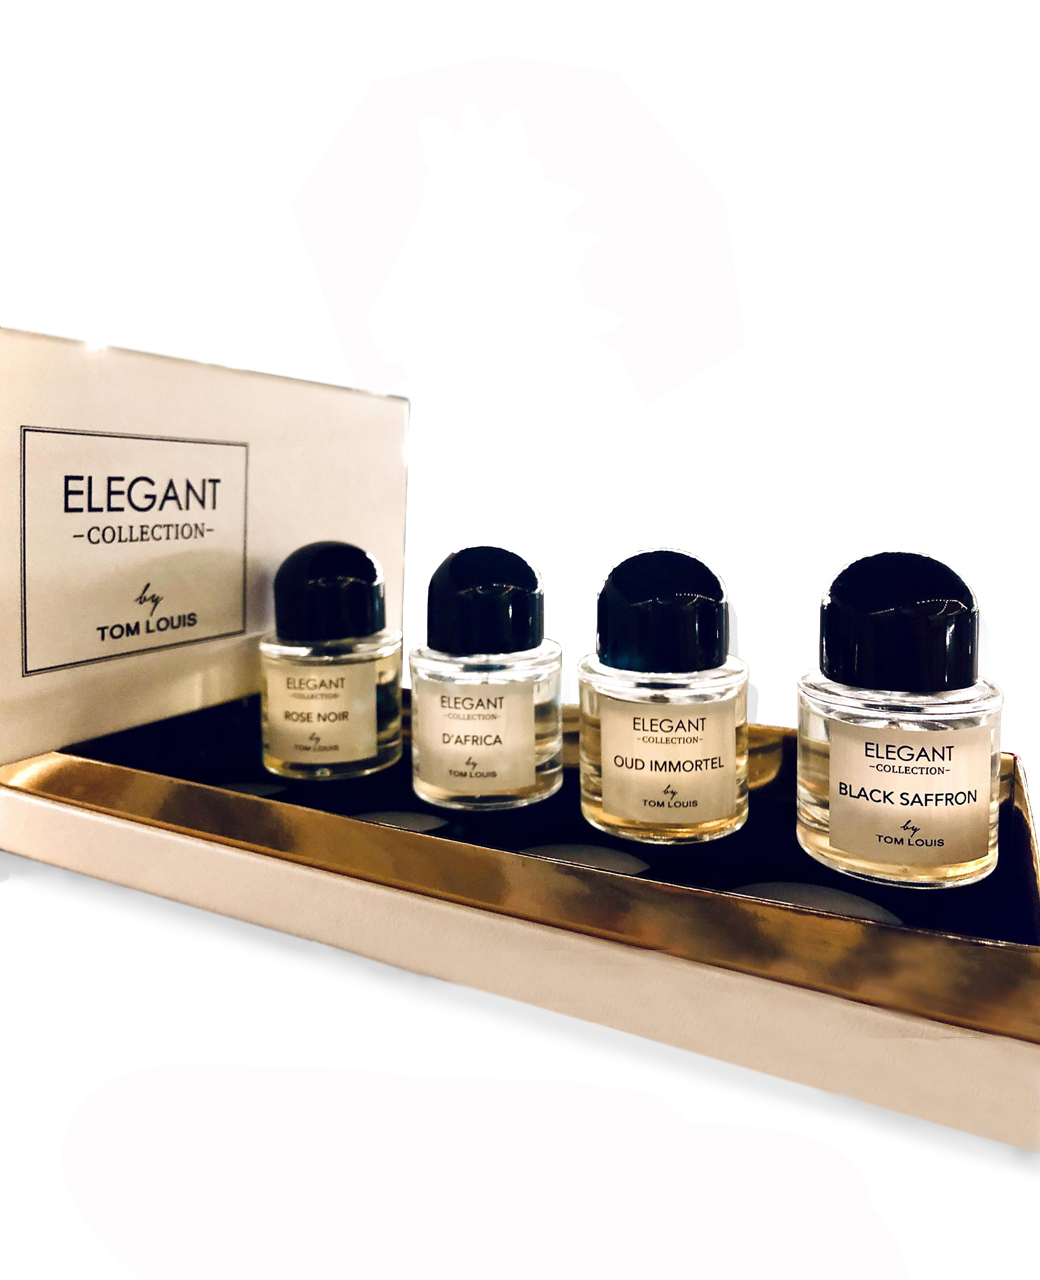 Elegant Collection 50ml by Tom Louis | Gift Set | My Perfumes